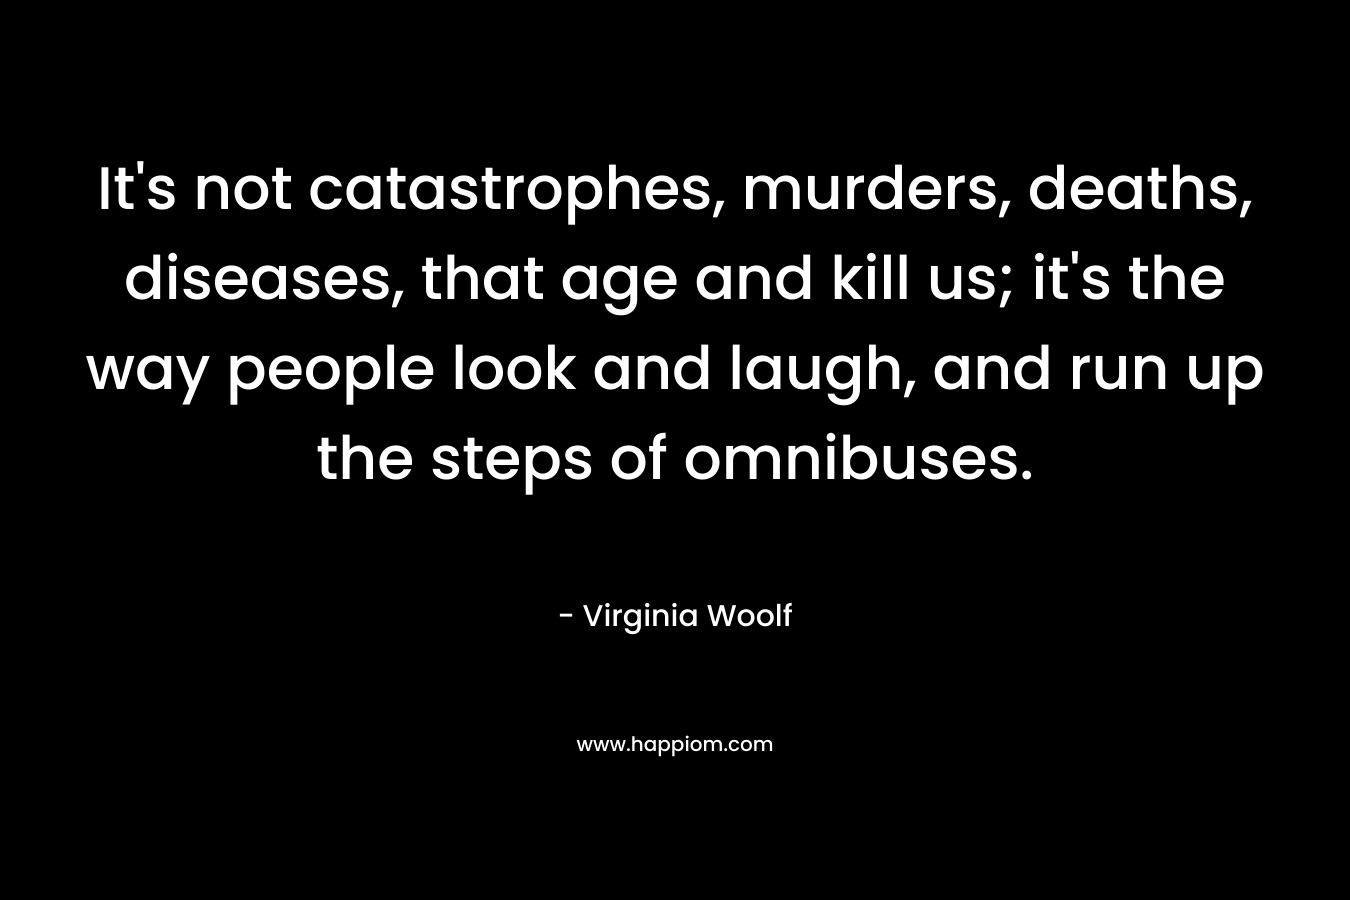 It’s not catastrophes, murders, deaths, diseases, that age and kill us; it’s the way people look and laugh, and run up the steps of omnibuses. – Virginia Woolf